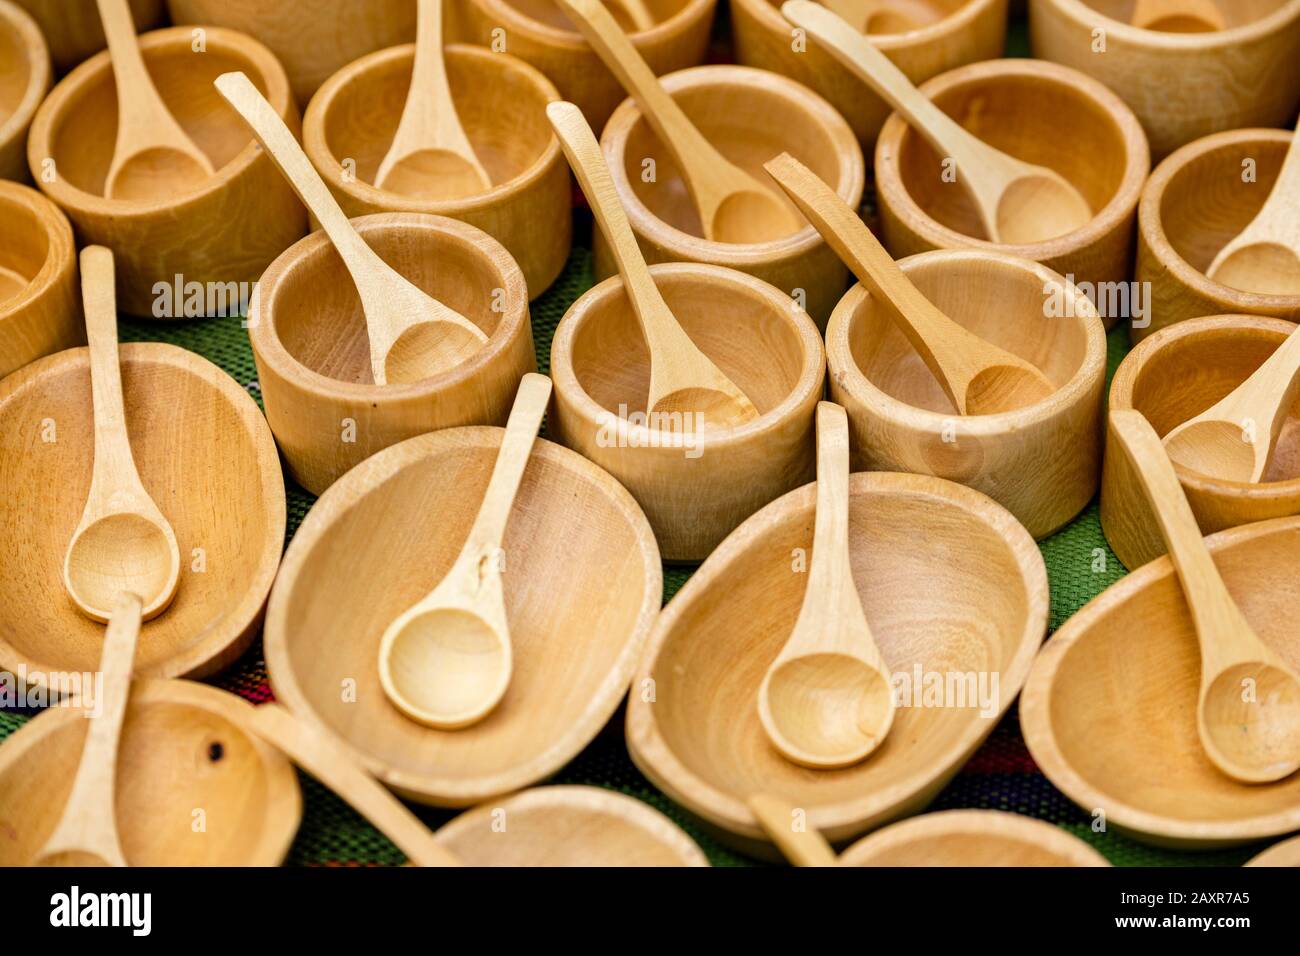 Peru market handmade wooden spoons and bowls for sale in the city Pisac public market, Peru Sacred Valley, Sacred Valley Peru Stock Photo